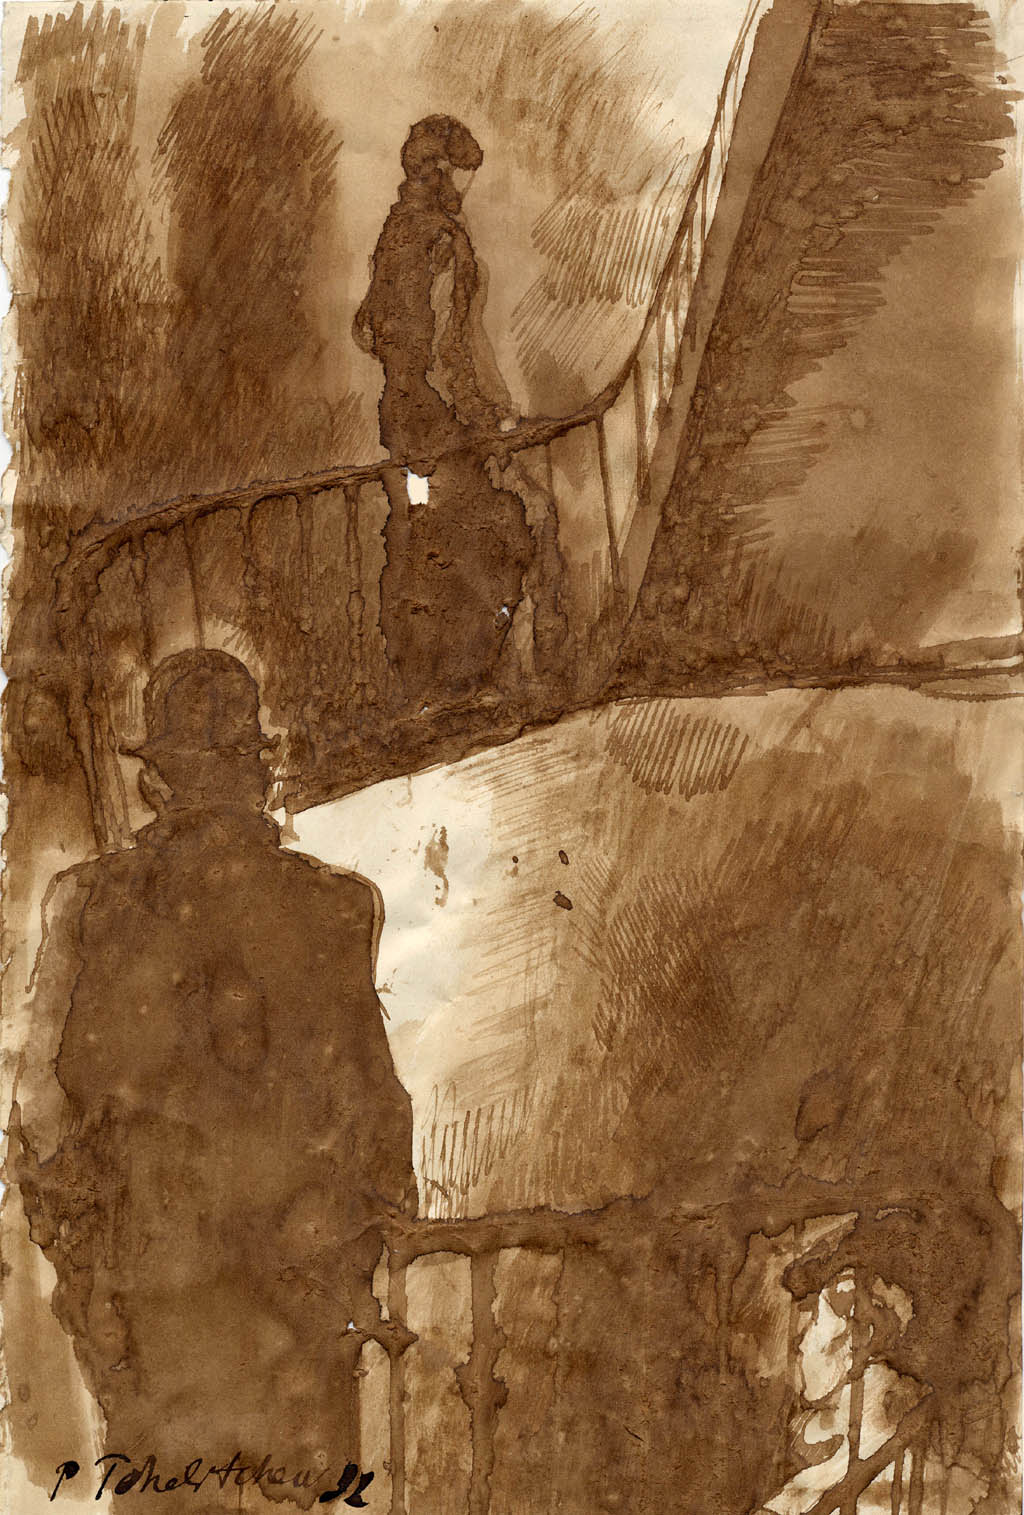 Pavel Tchelitchew - The Stair - 1932 sepia ink and wash on paper